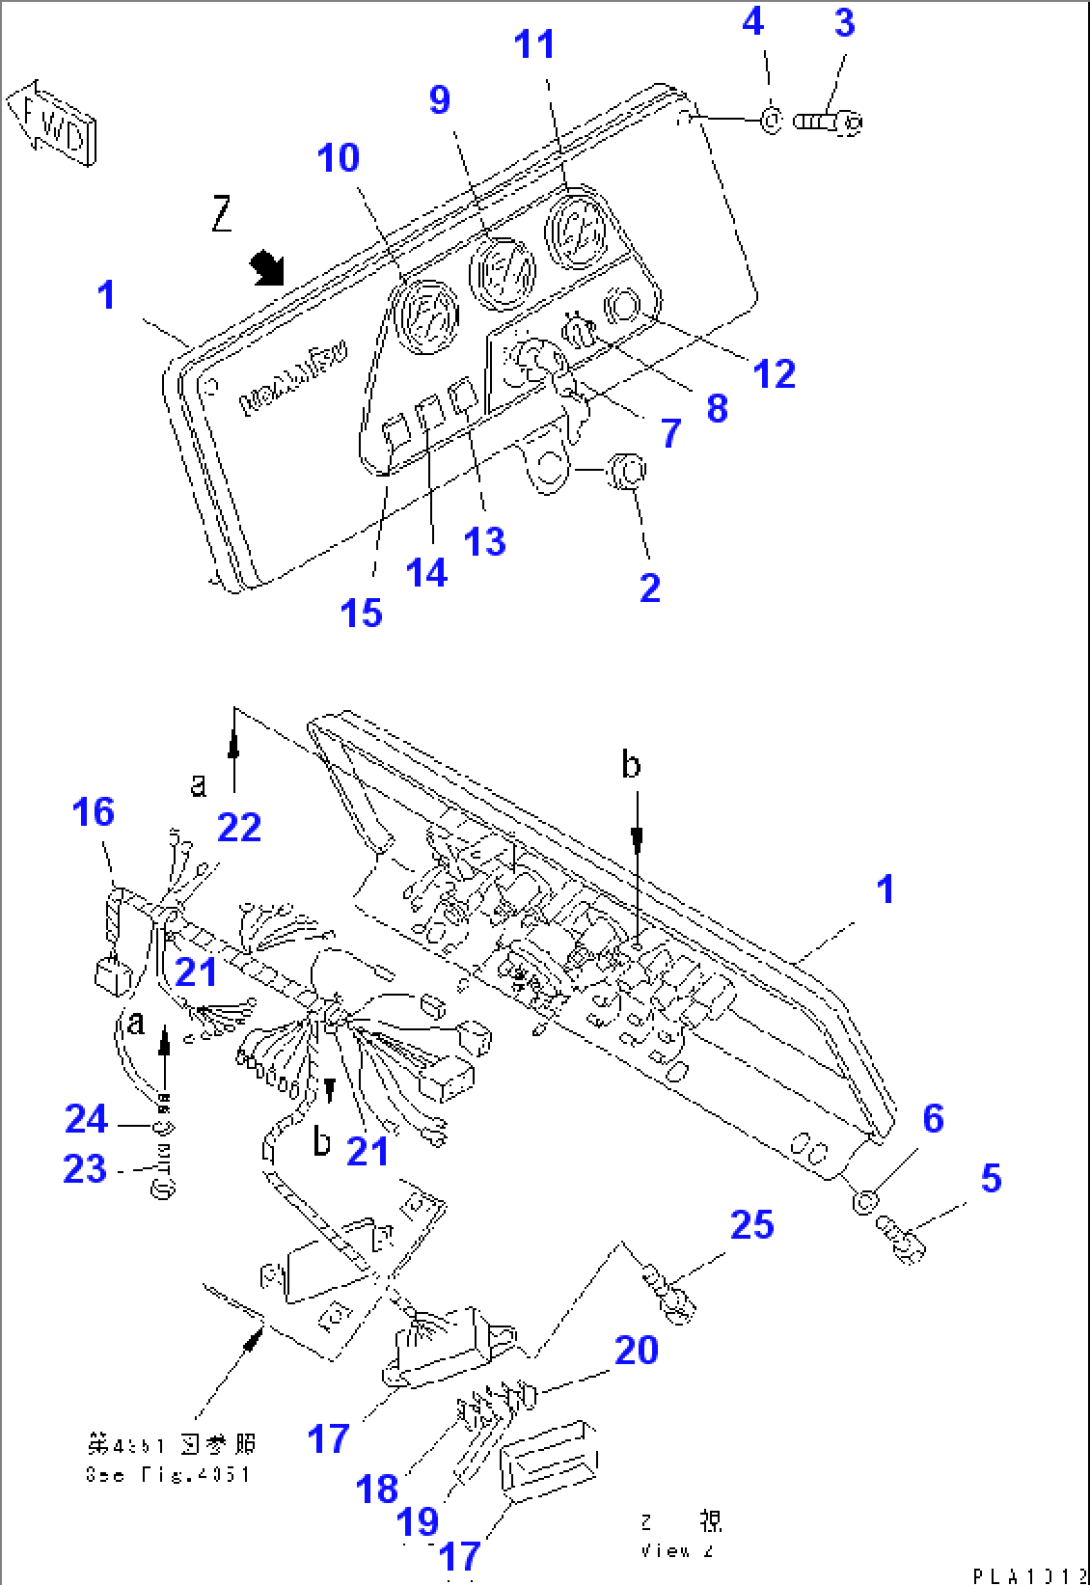 INSTRUMENT PANEL (FOR MONO LEVER STEERING)